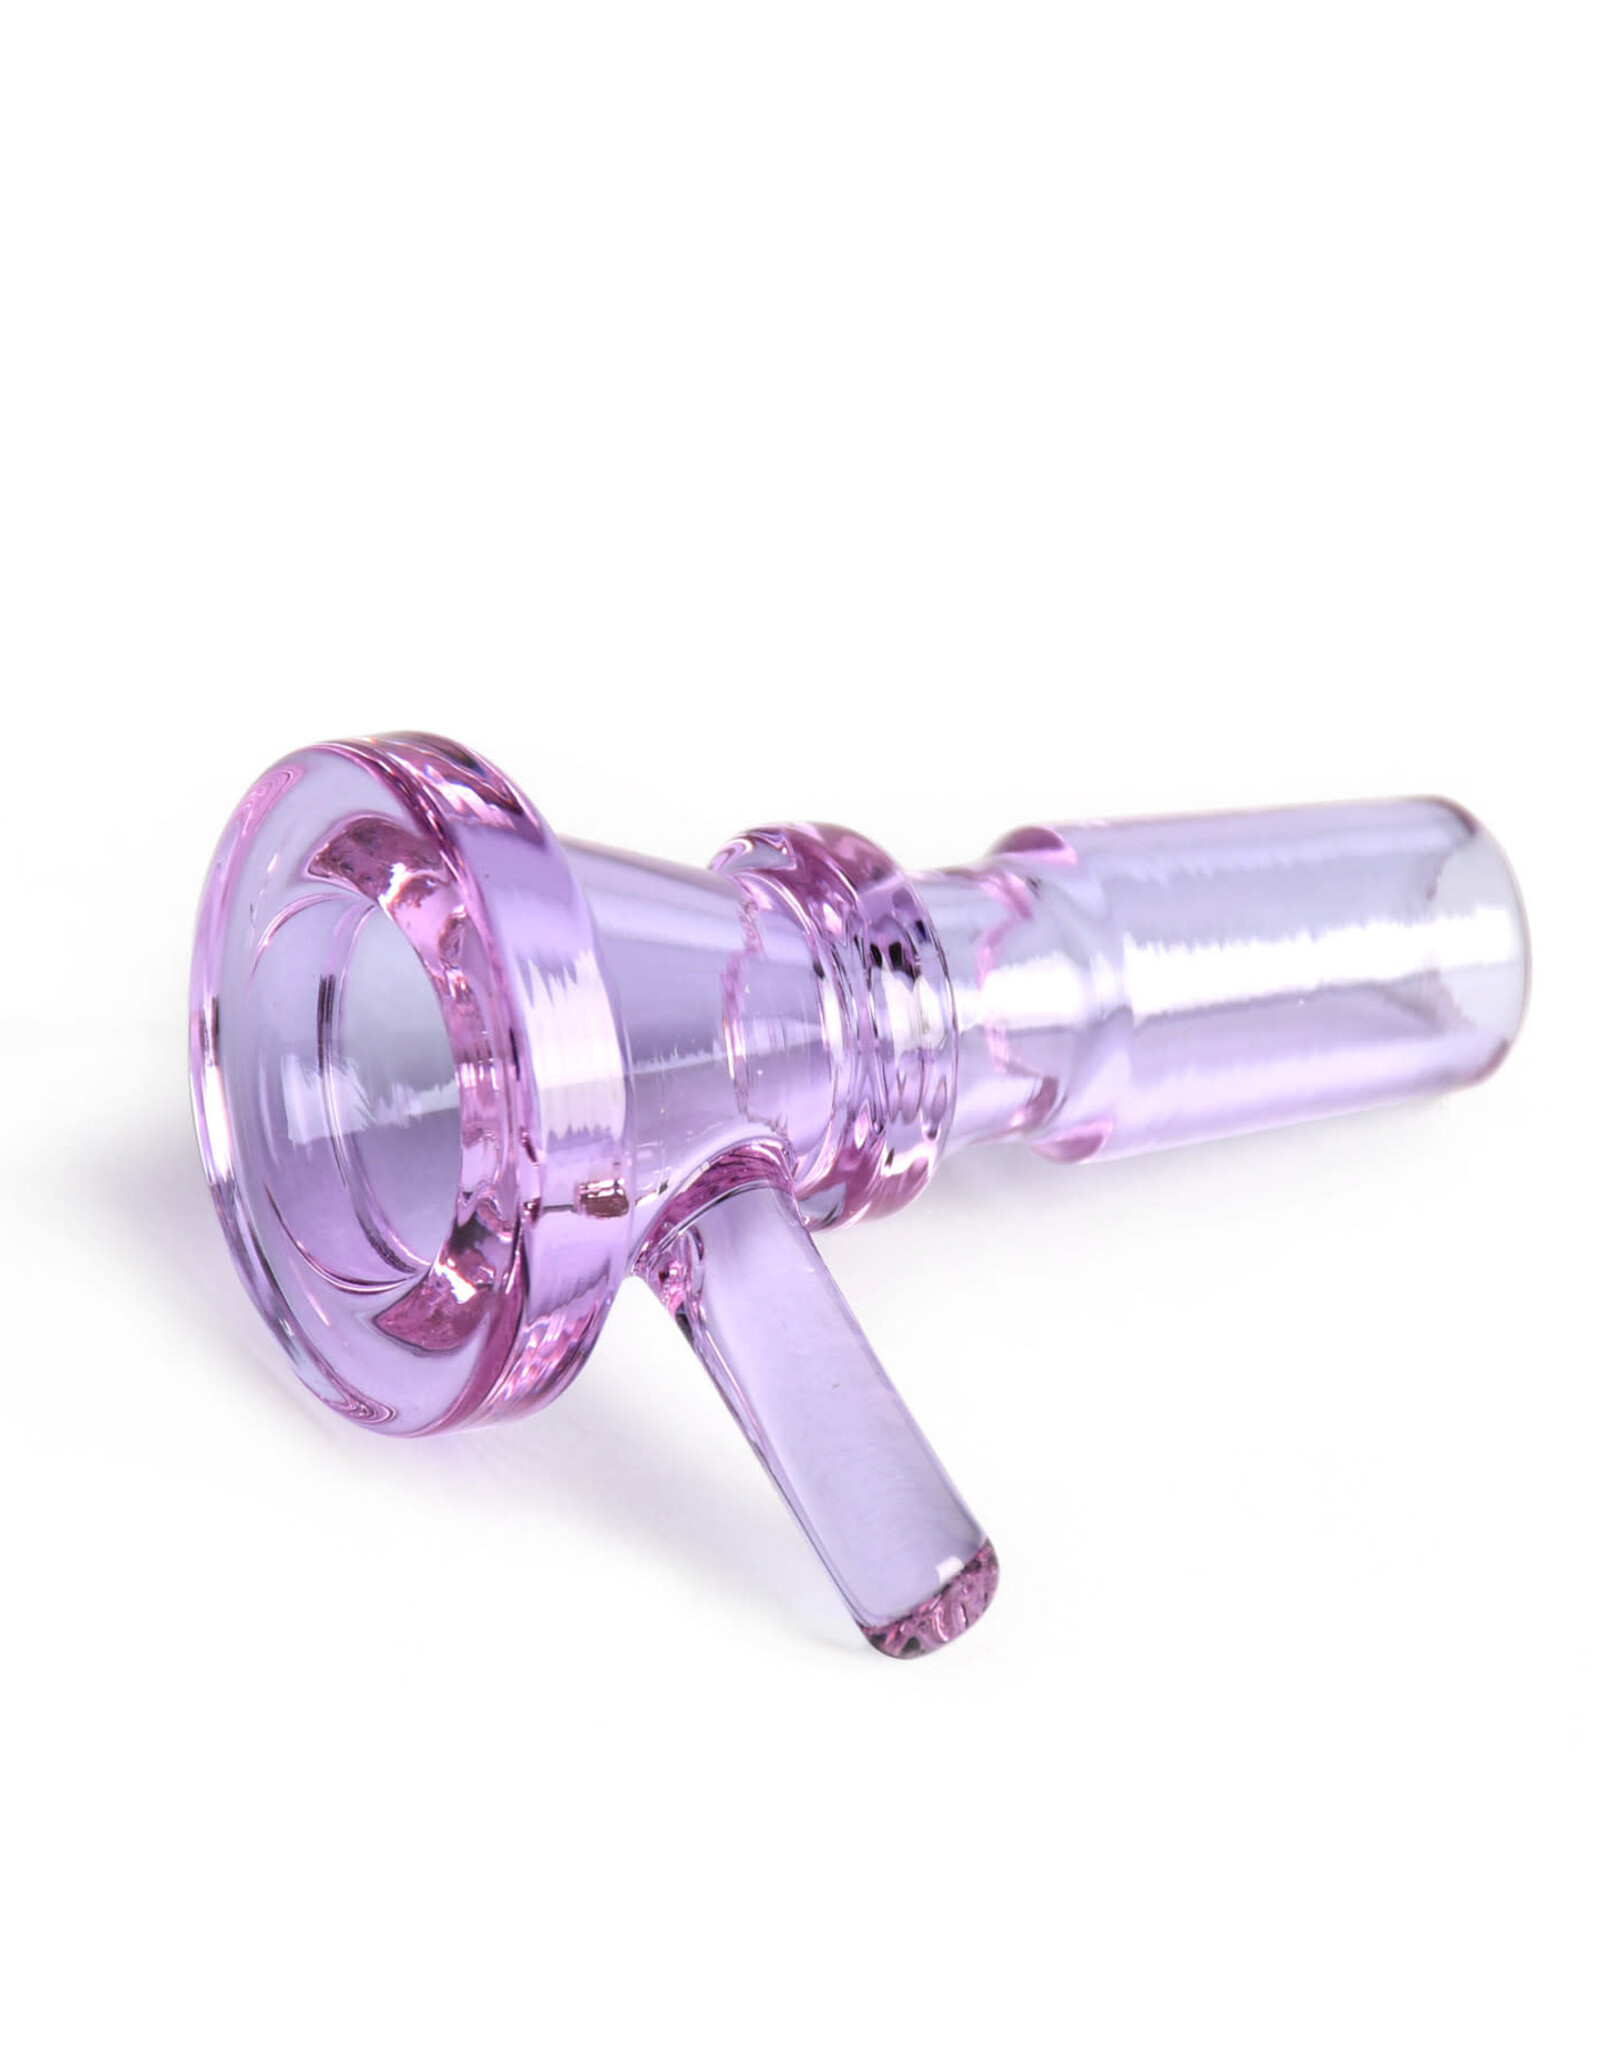 West Coast Gifts 14mm Blaster Cone Pull-Out PURPLE